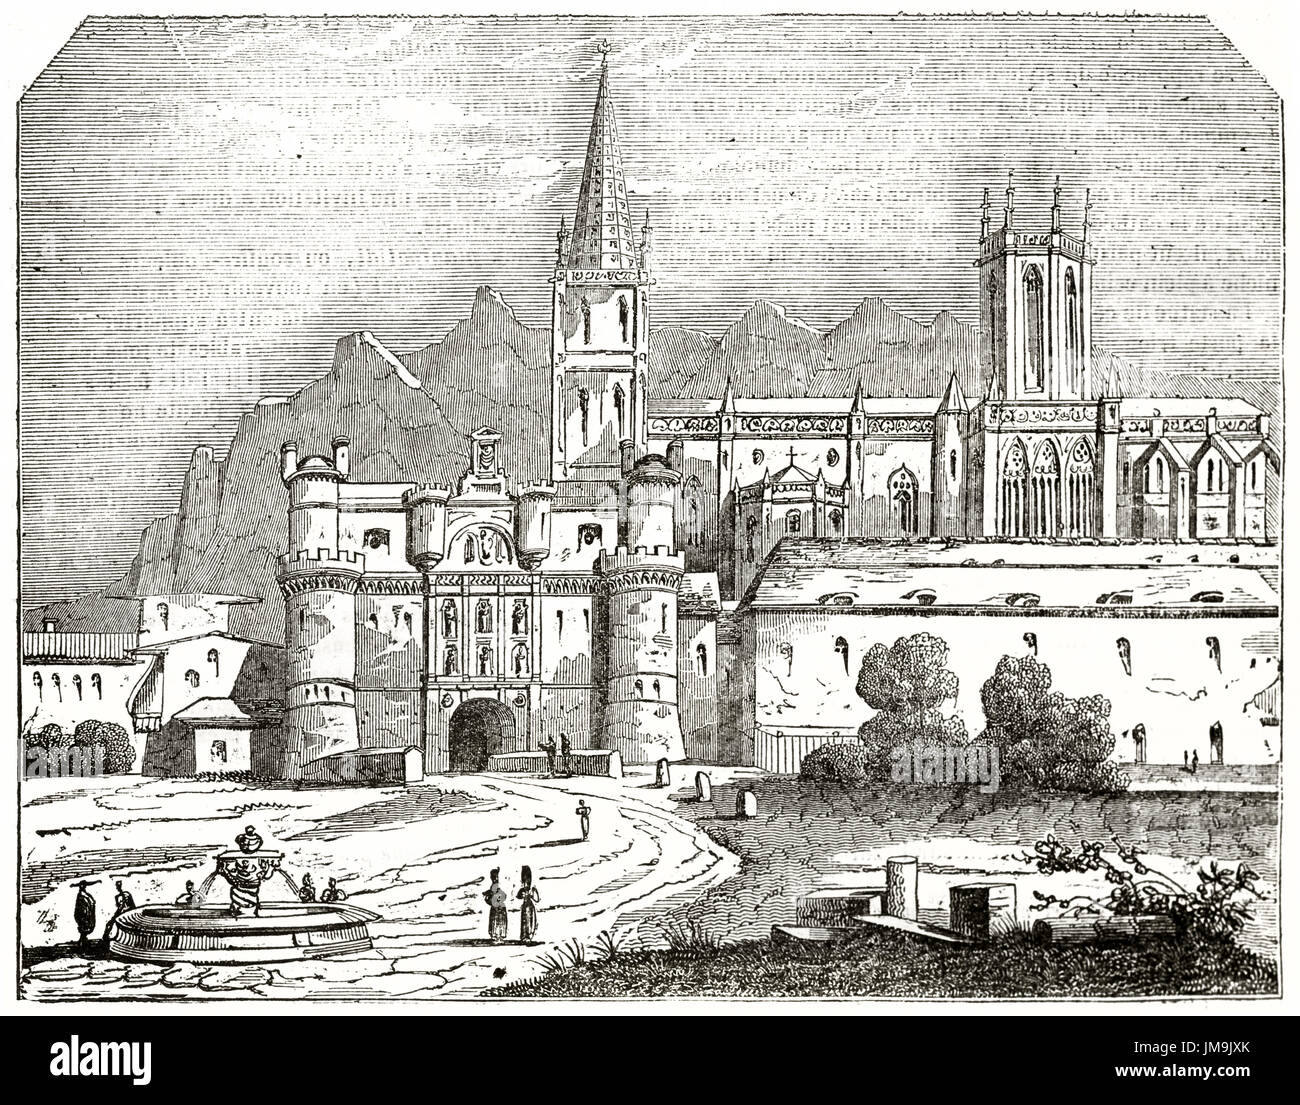 Old view of Burgos, Spain. Created by Laino, published on Magasin Pittoresque, Paris, 1837. Stock Photo